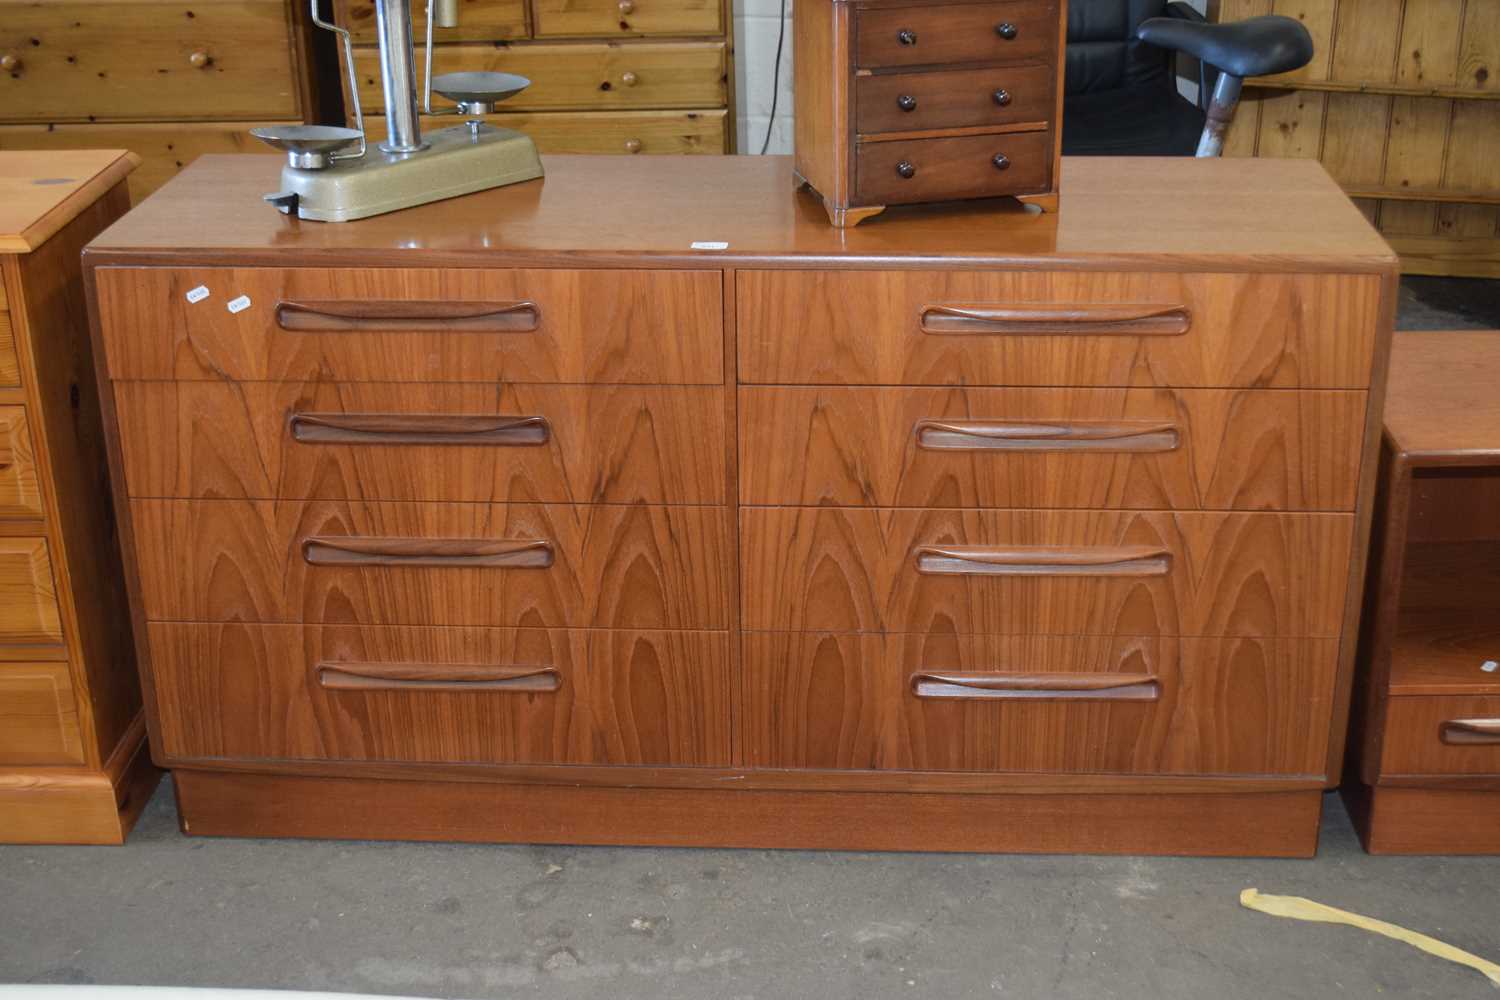 An eight drawer G-Plan low chest together with a similar television stand or entertainment unit